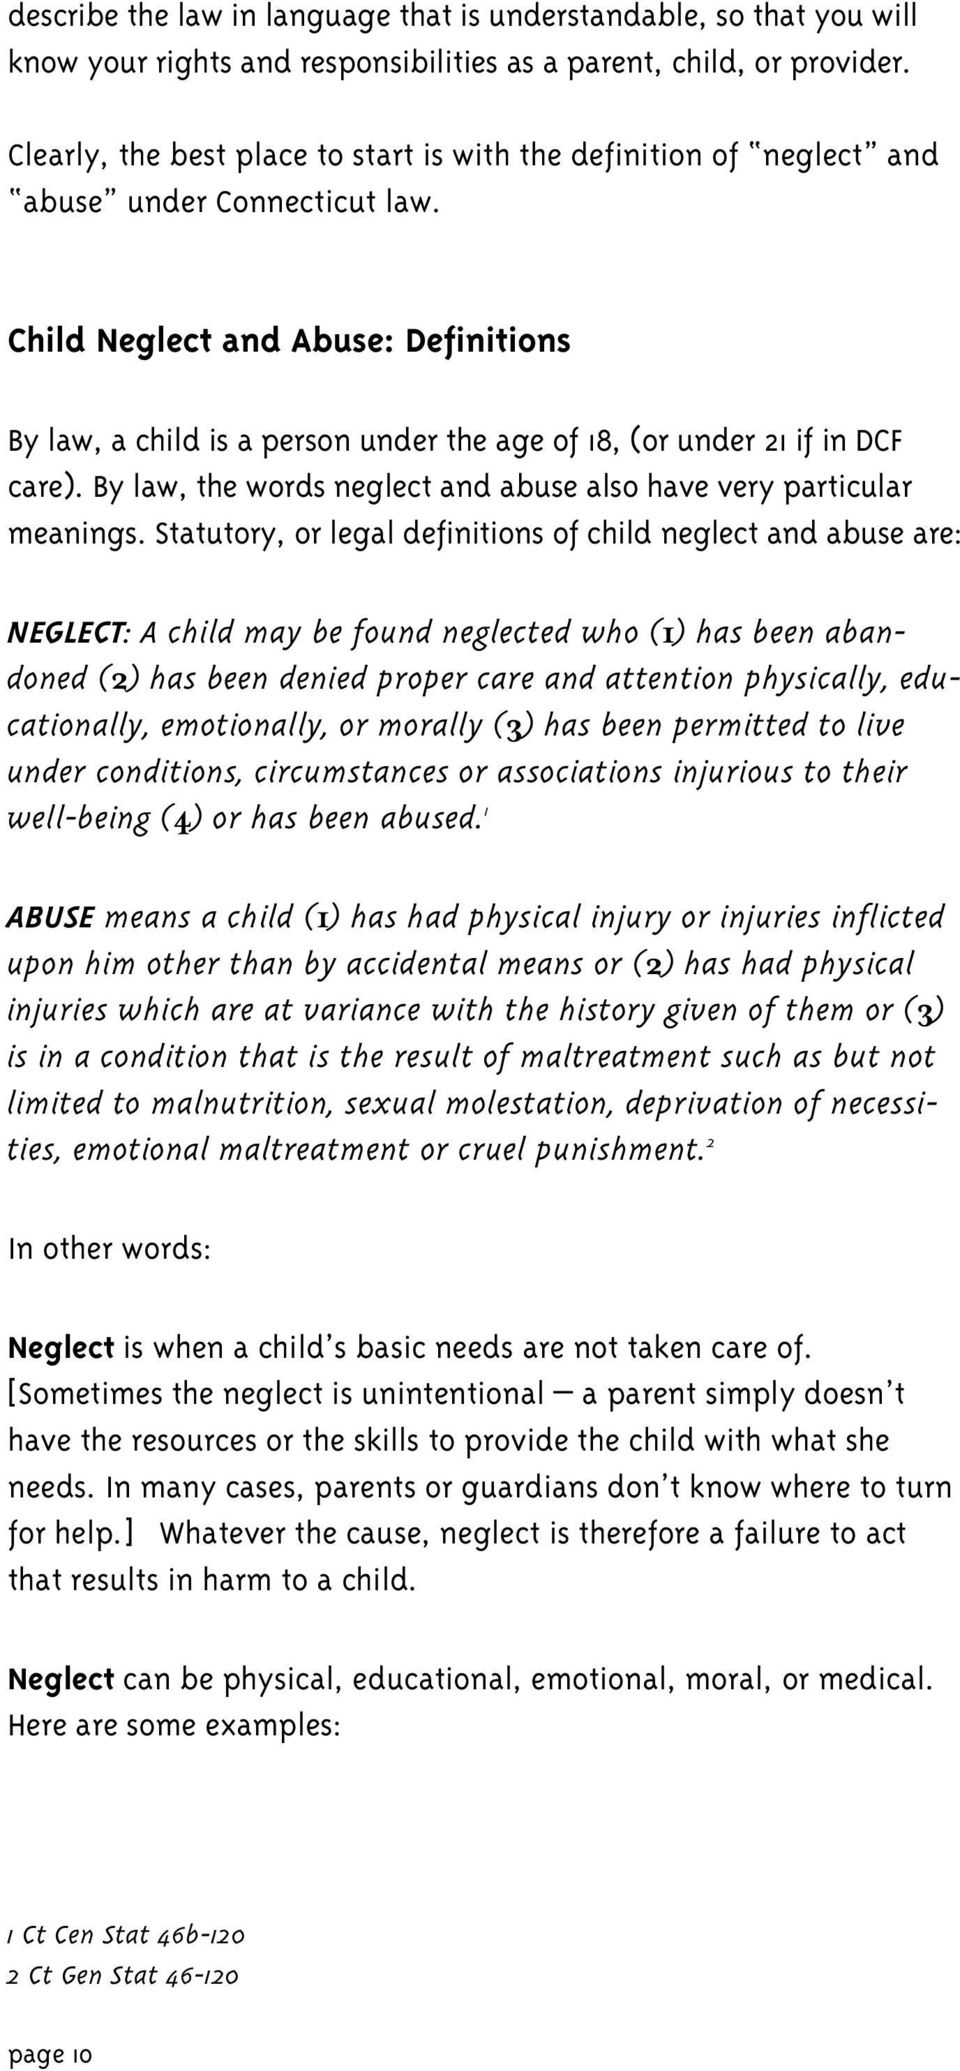 Child Neglect and Abuse: Definitions By law, a child is a person under the age of 18, (or under 21 if in DCF care). By law, the words neglect and abuse also have very particular meanings.